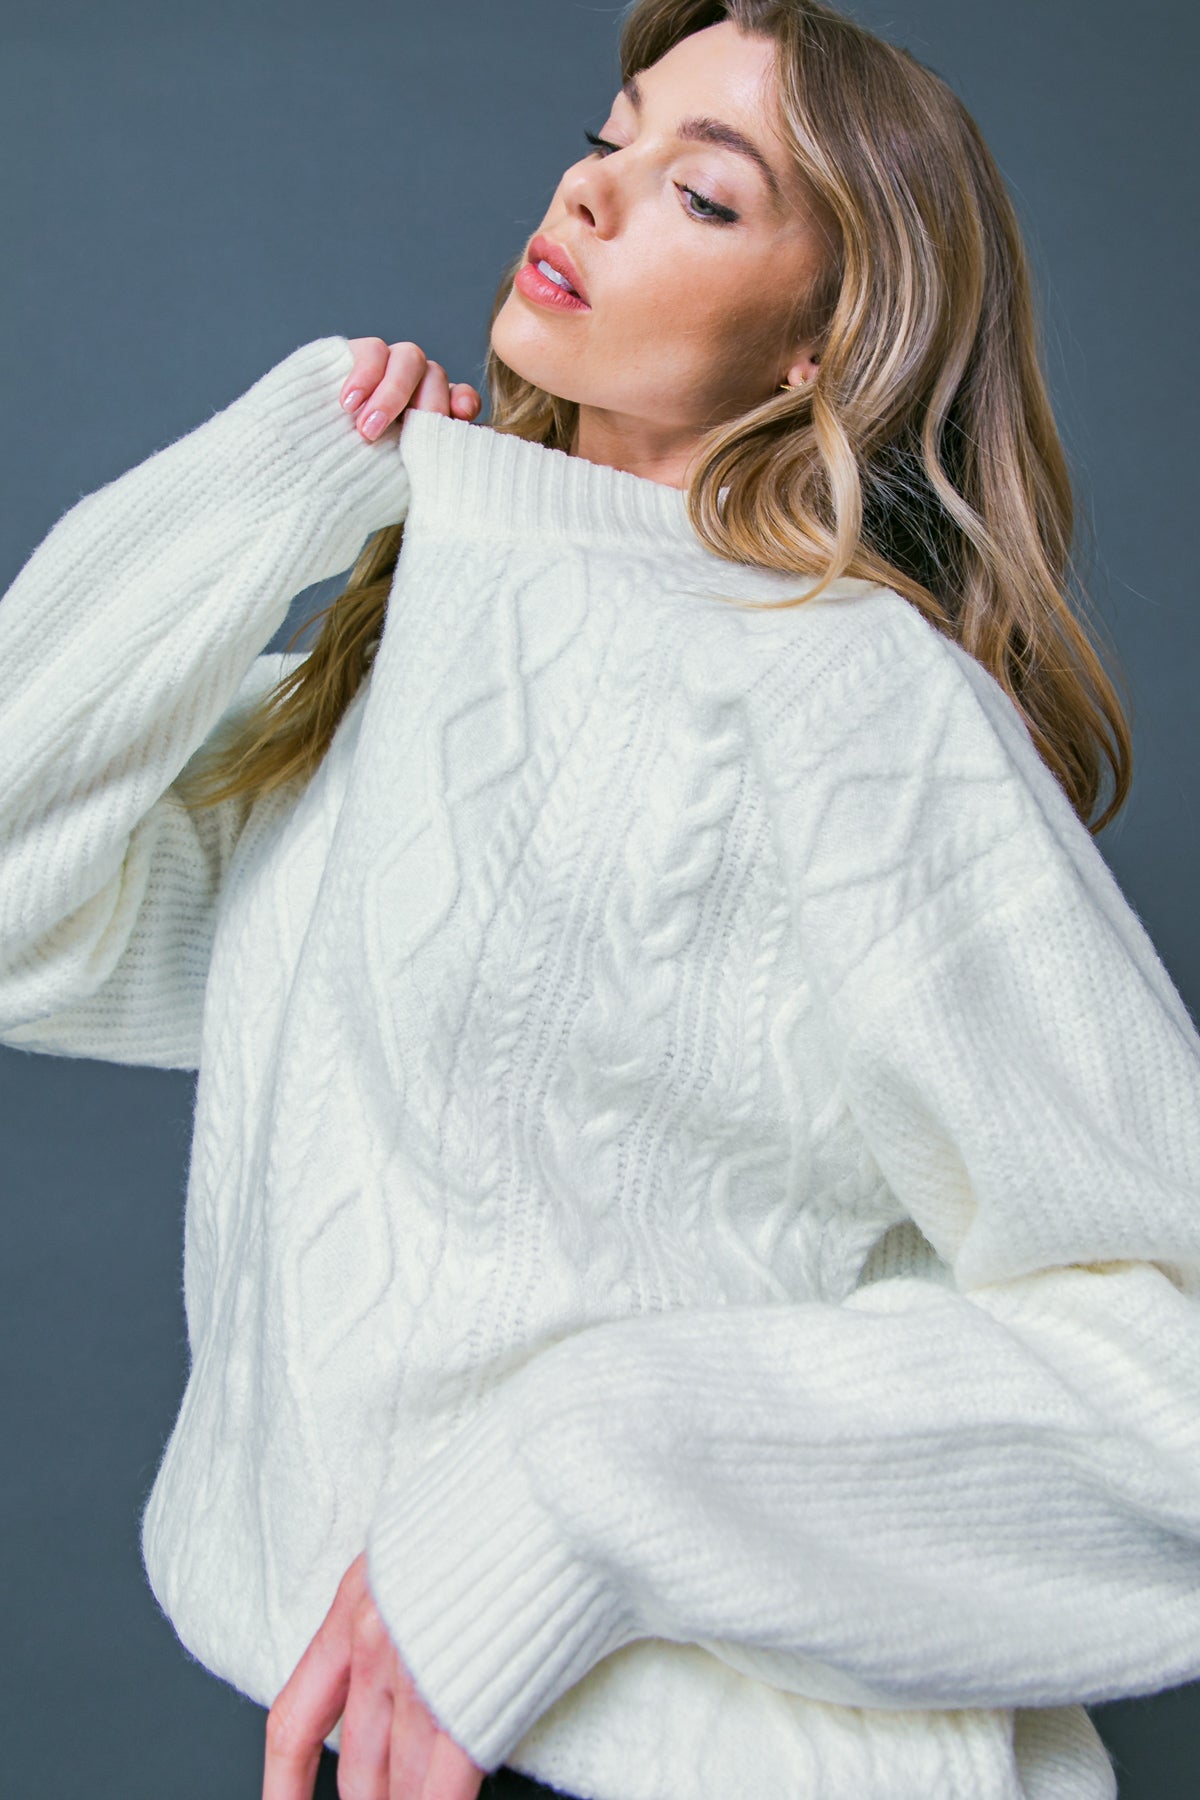 Make your fairytale dreams come true with this Snow White inspired knit. With a mock neck, long sleeve, and relaxed body, this sweater will have you feeling cozy and cute! 